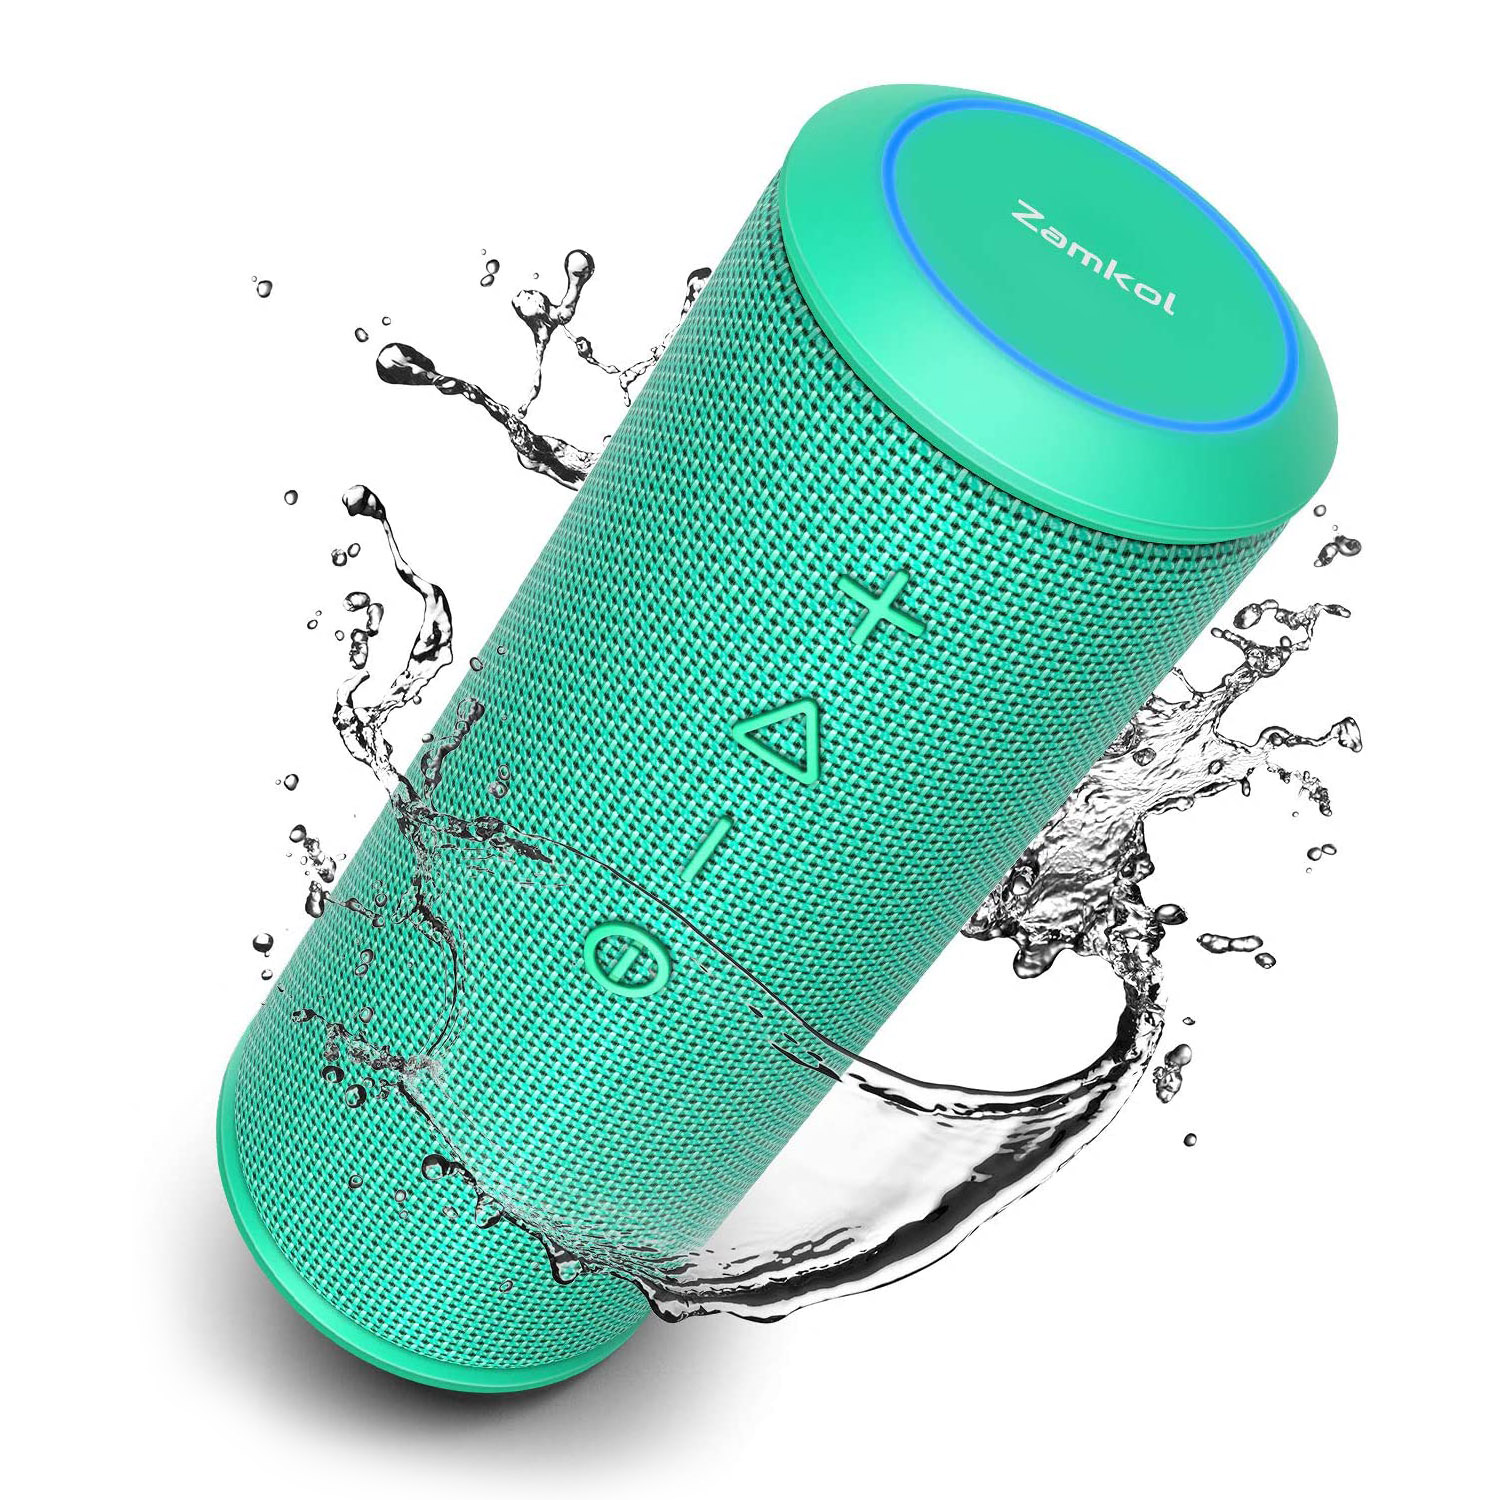 Zamkol Bluetooth Speaker IPX6 Waterproof 30W Bluetooth Speakers Portable Wireless 360 Degree Loud Stereo Sound and Enhanced X-Bass Built-in Mic for Home Party Outdoor Bluetooth 5.0 Dual Pairing